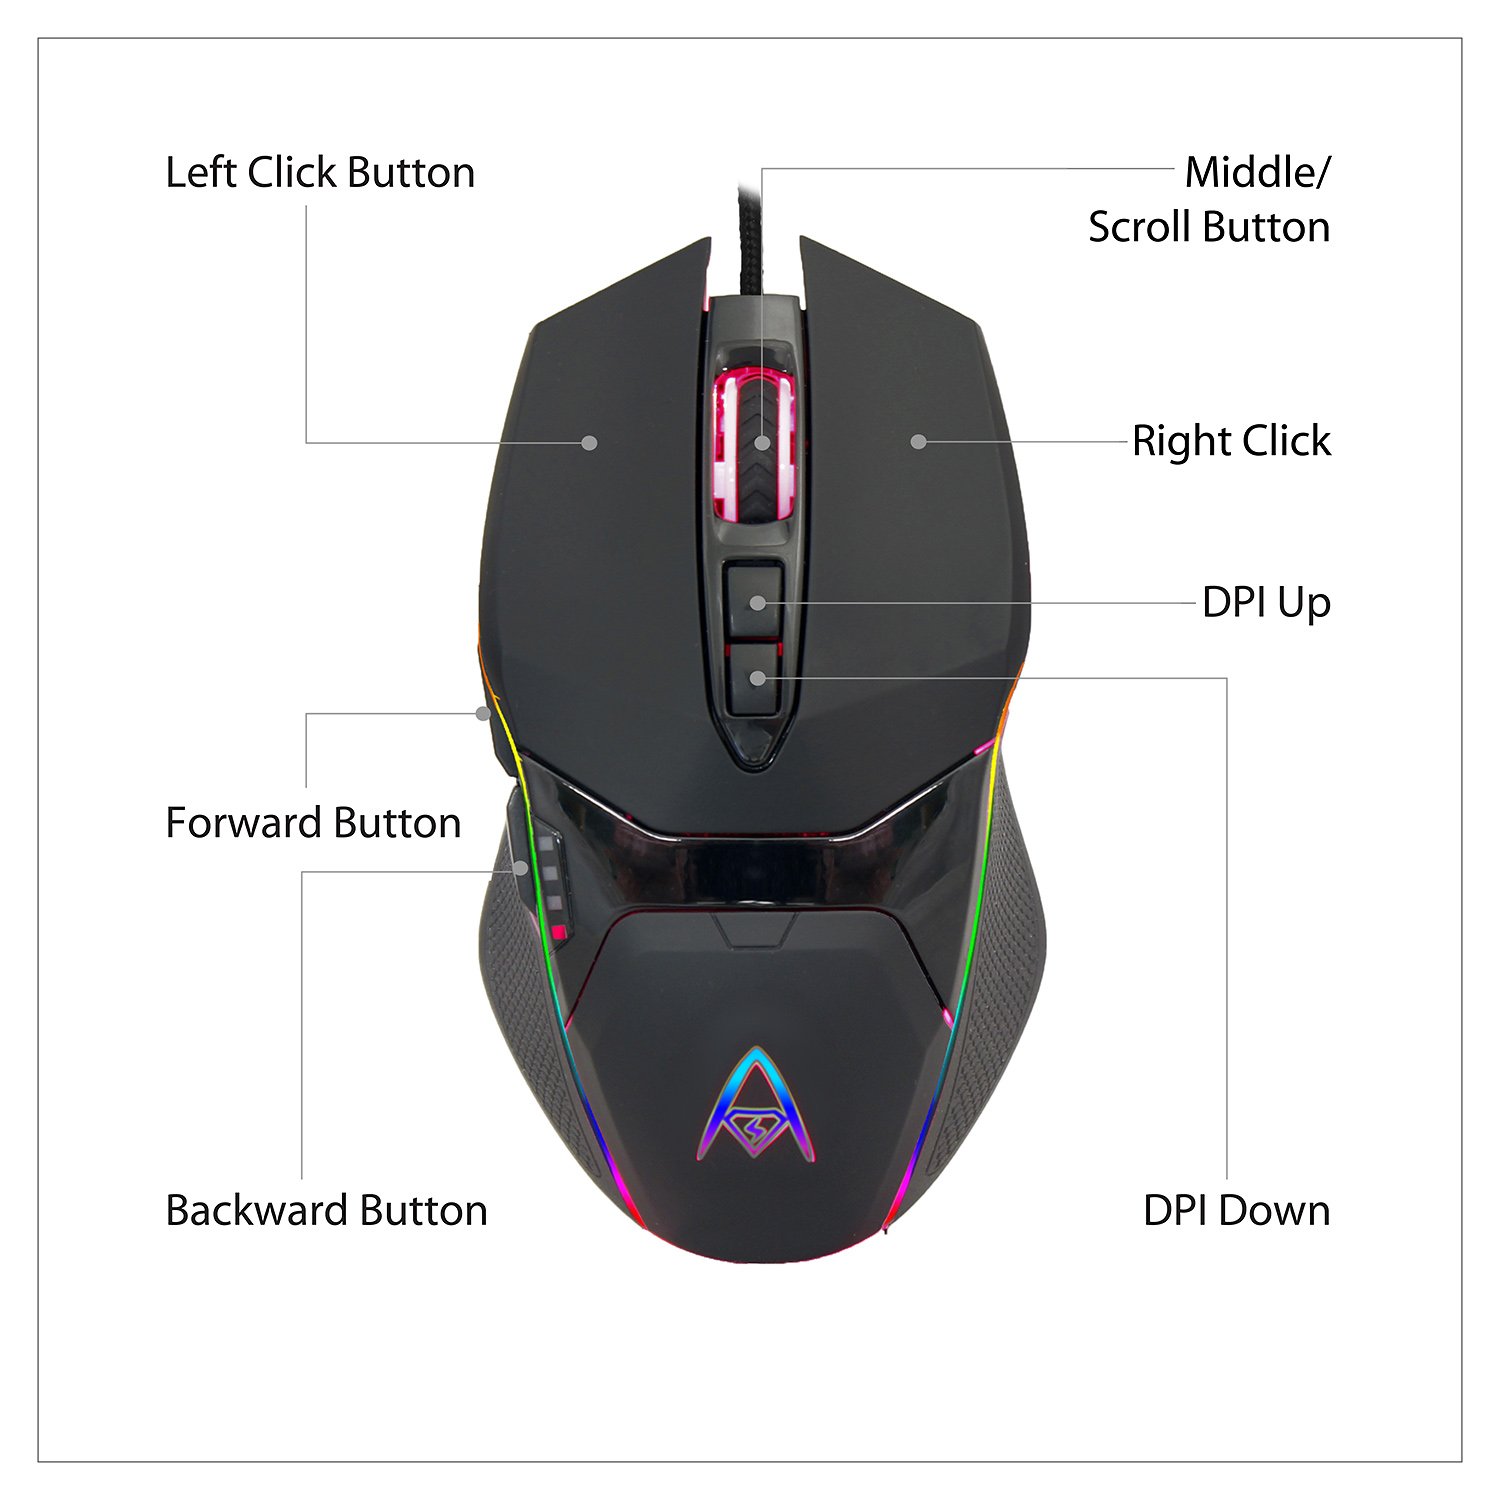 Adesso iMouse X5 RGB Illuminated 7-Button Ambidextrous Gaming Mouse